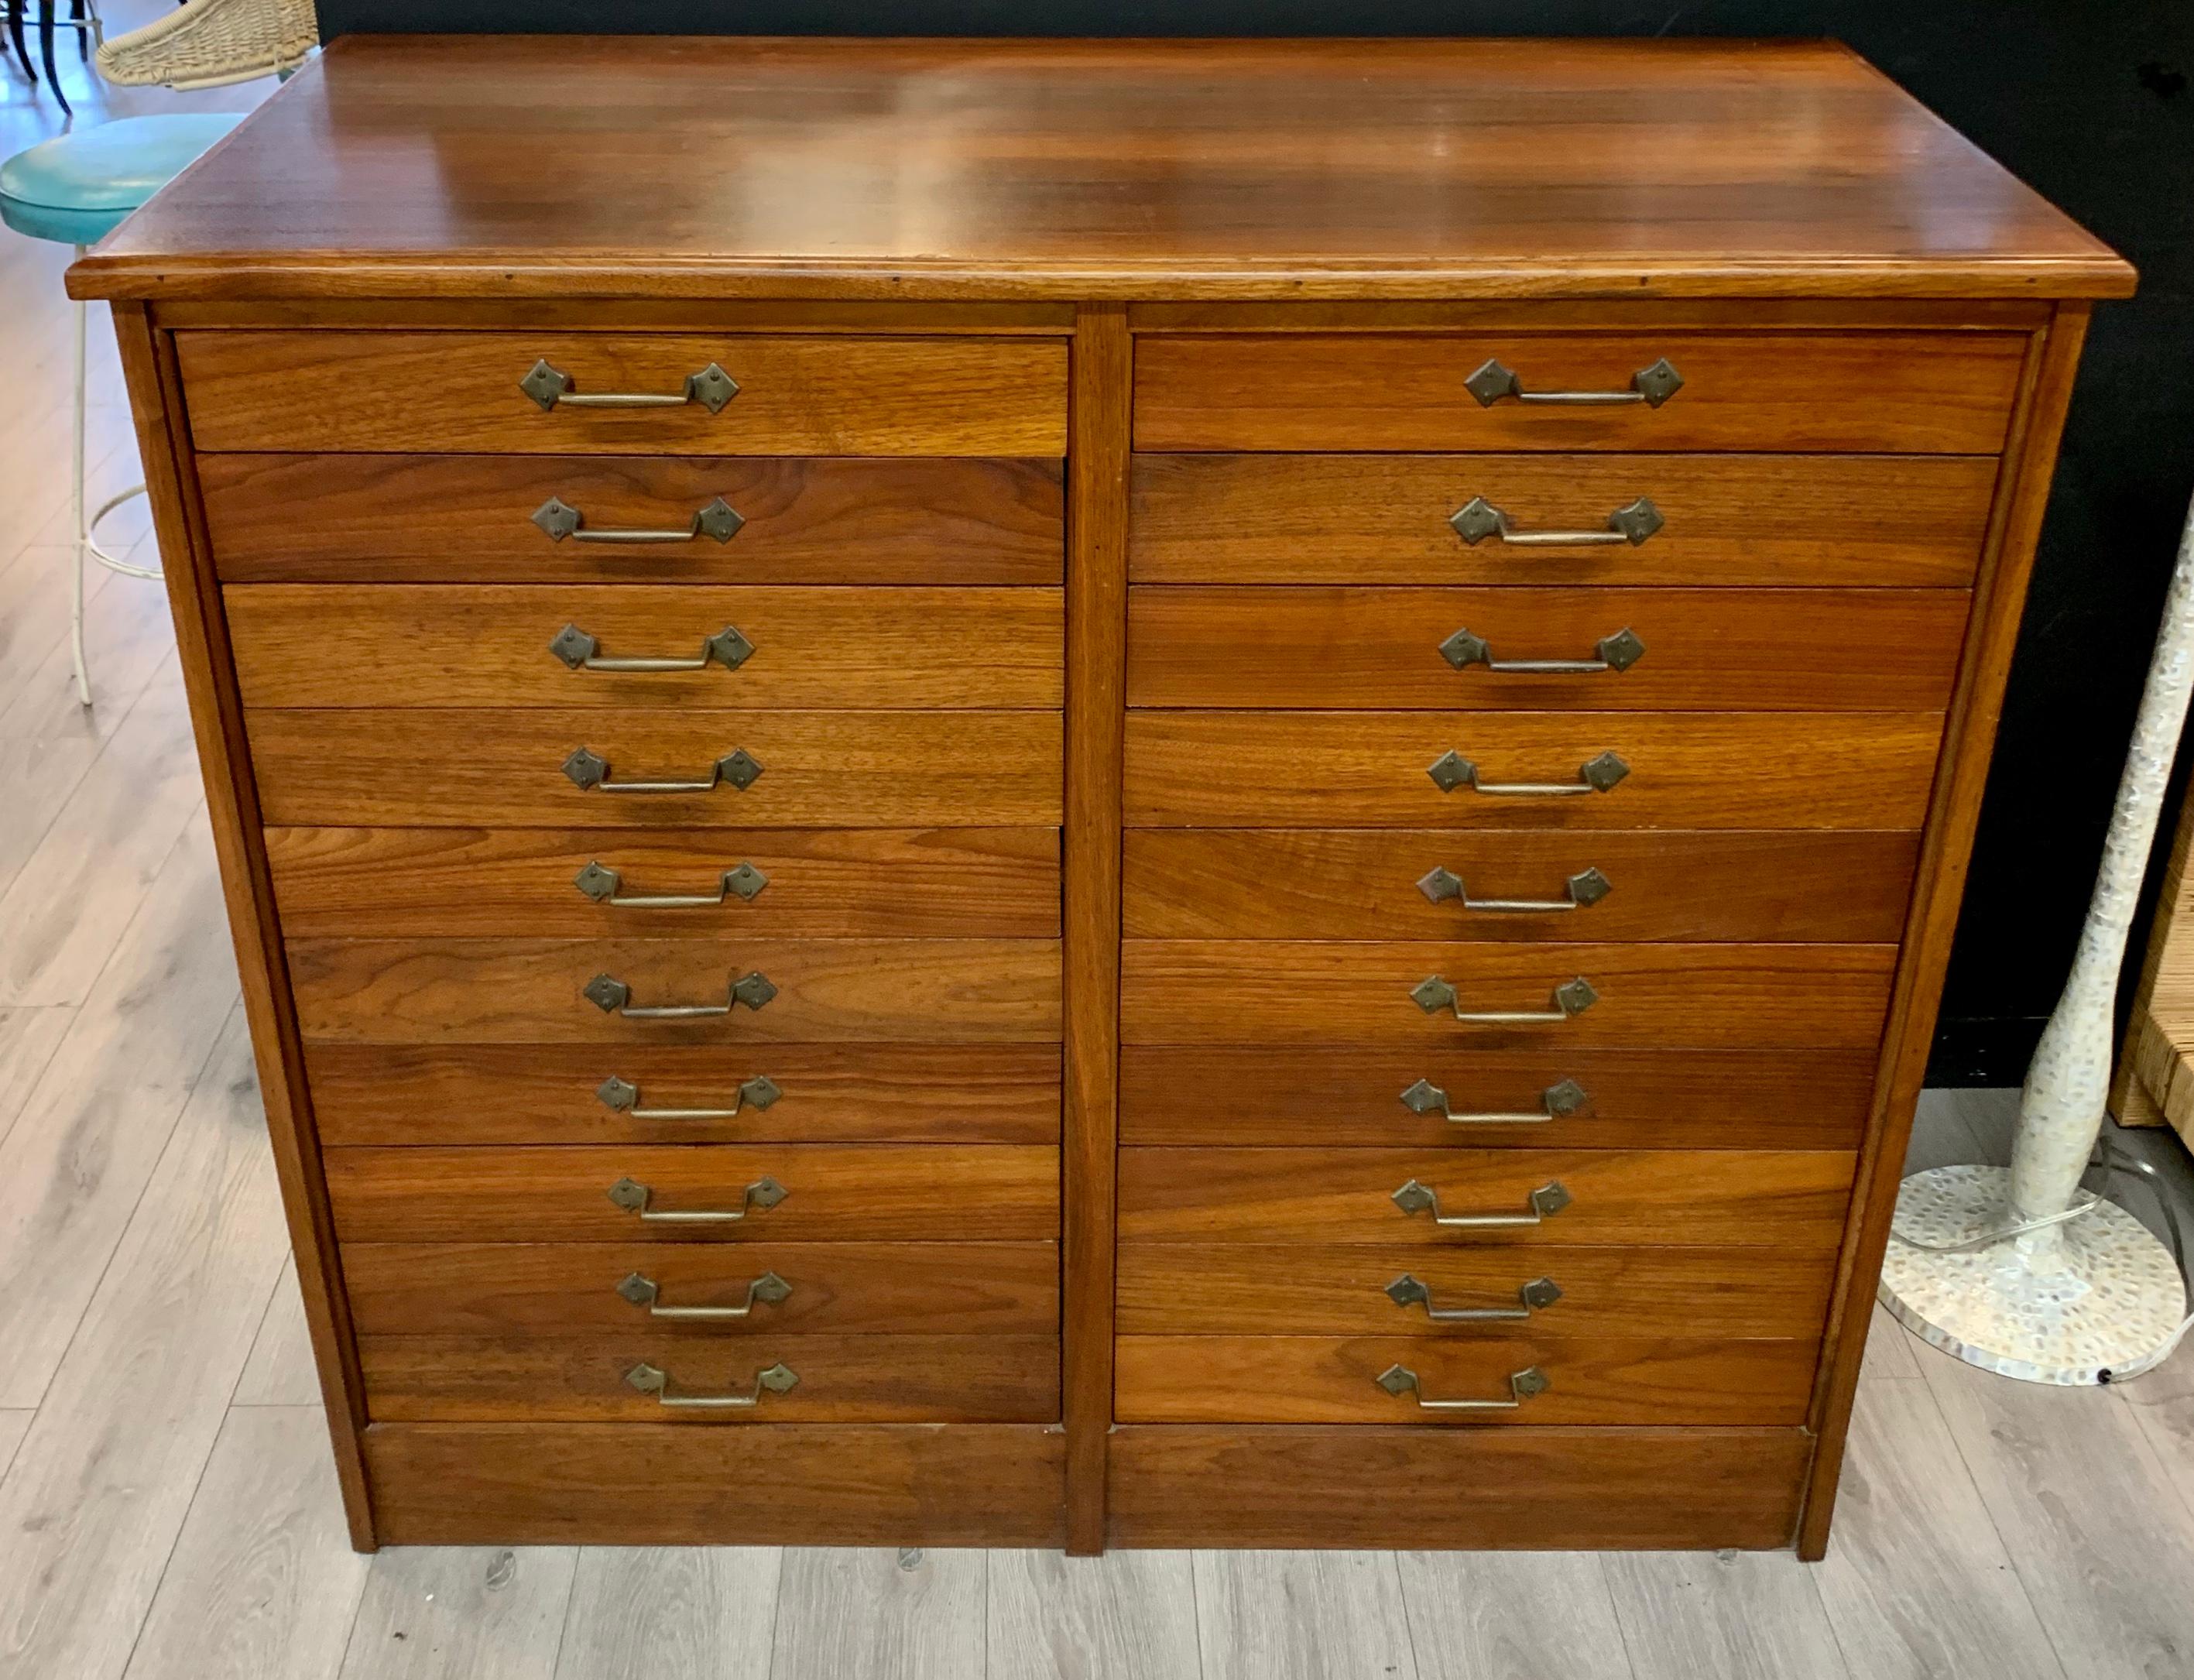 Magnificent twenty-drawer cherrywood architects flat file cabinet that features ten drawers on each side.